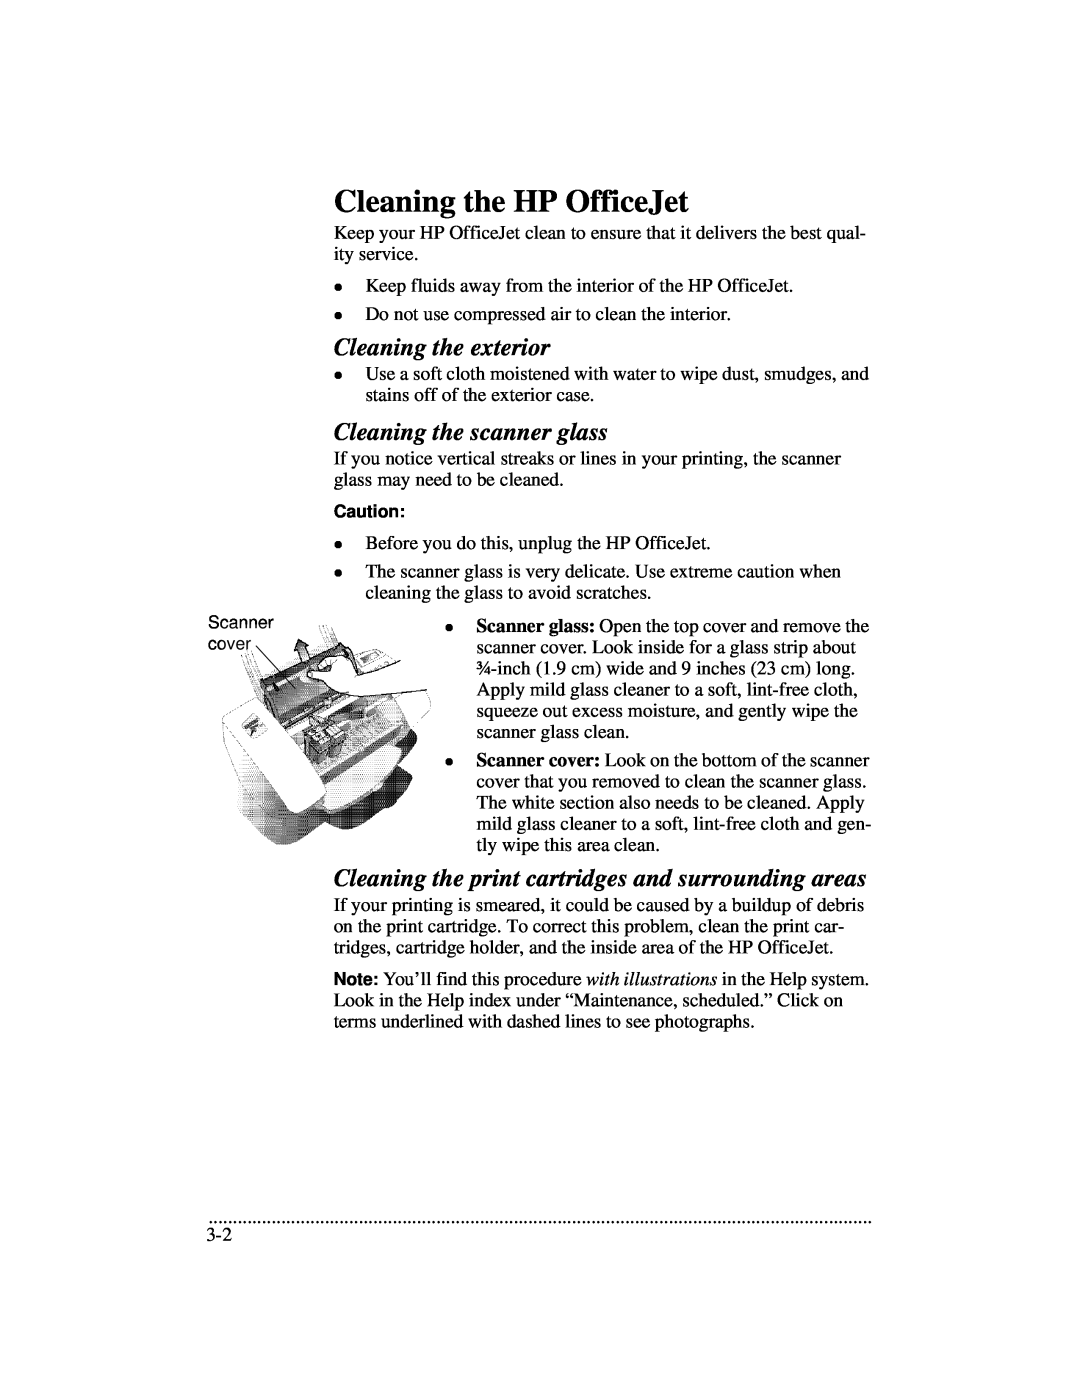 HP 700 manual Cleaning the HP OfficeJet, Cleaning the exterior, Cleaning the scanner glass 